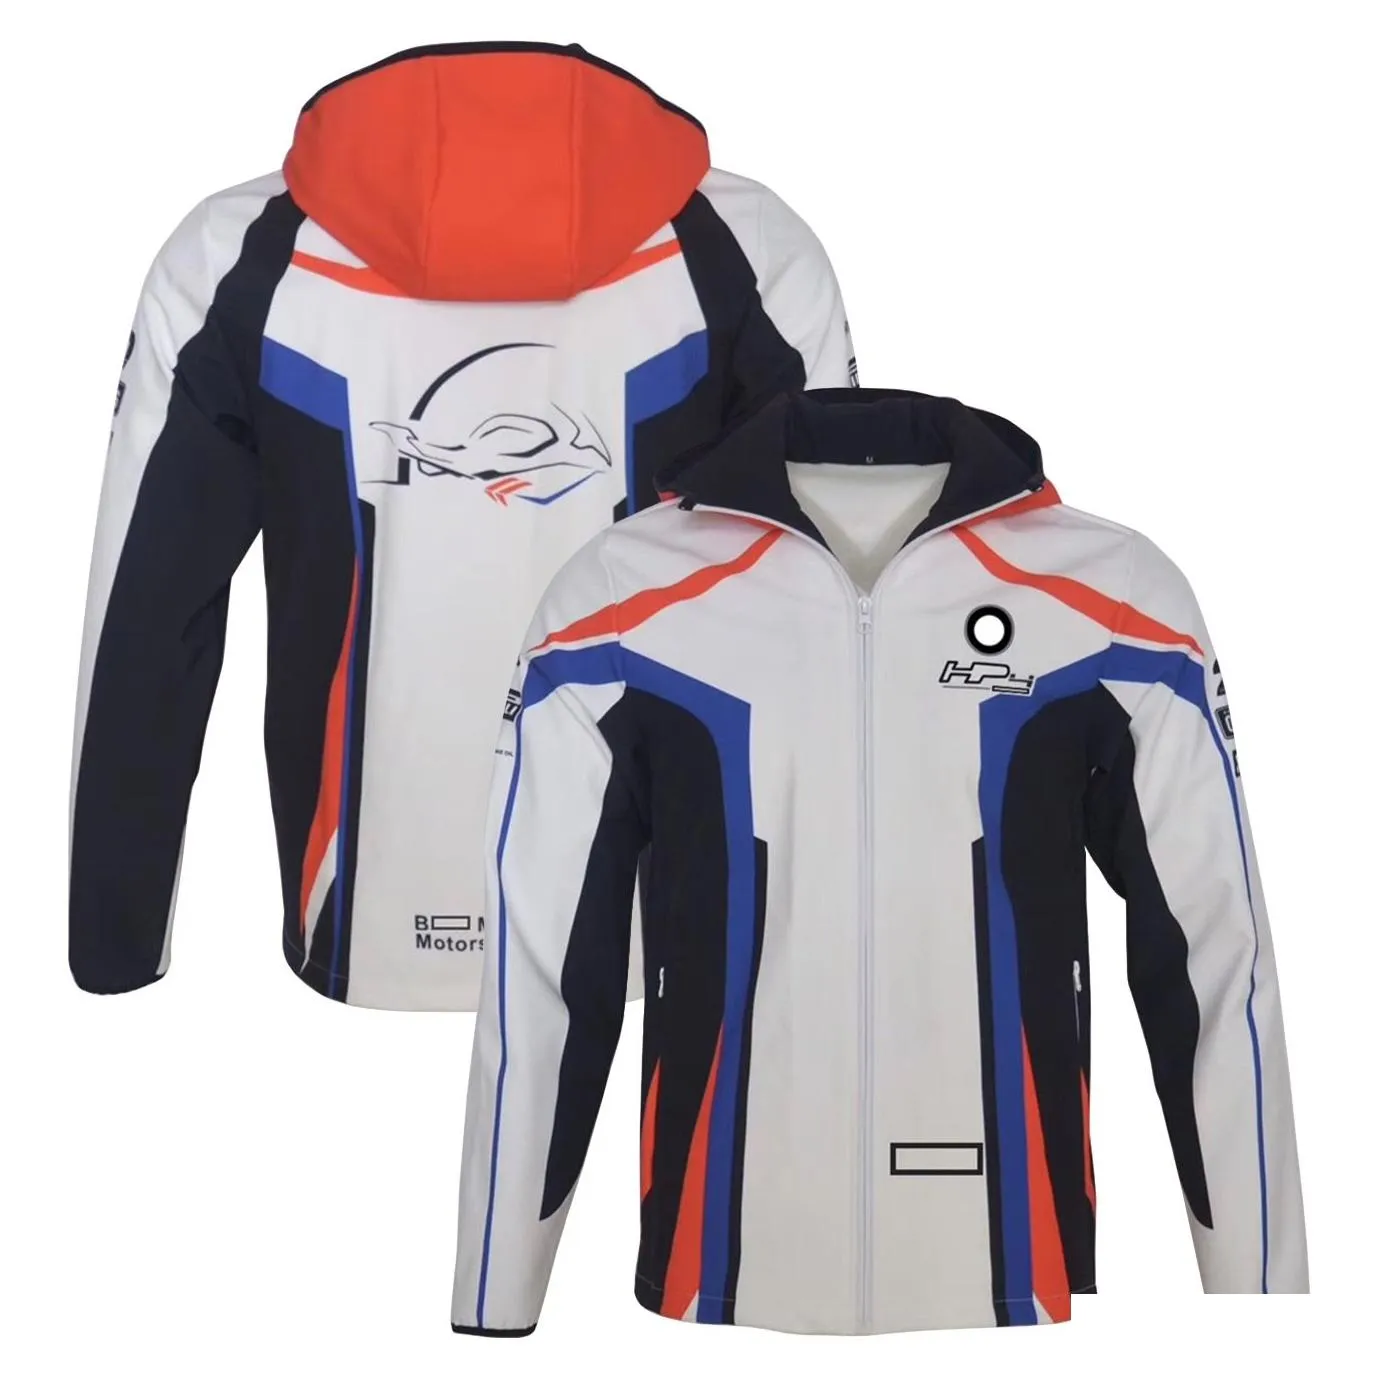 2021 off-road motorcycle racing suit rider downhill sweater outdoor anti-fall warm and windproof customized style xl